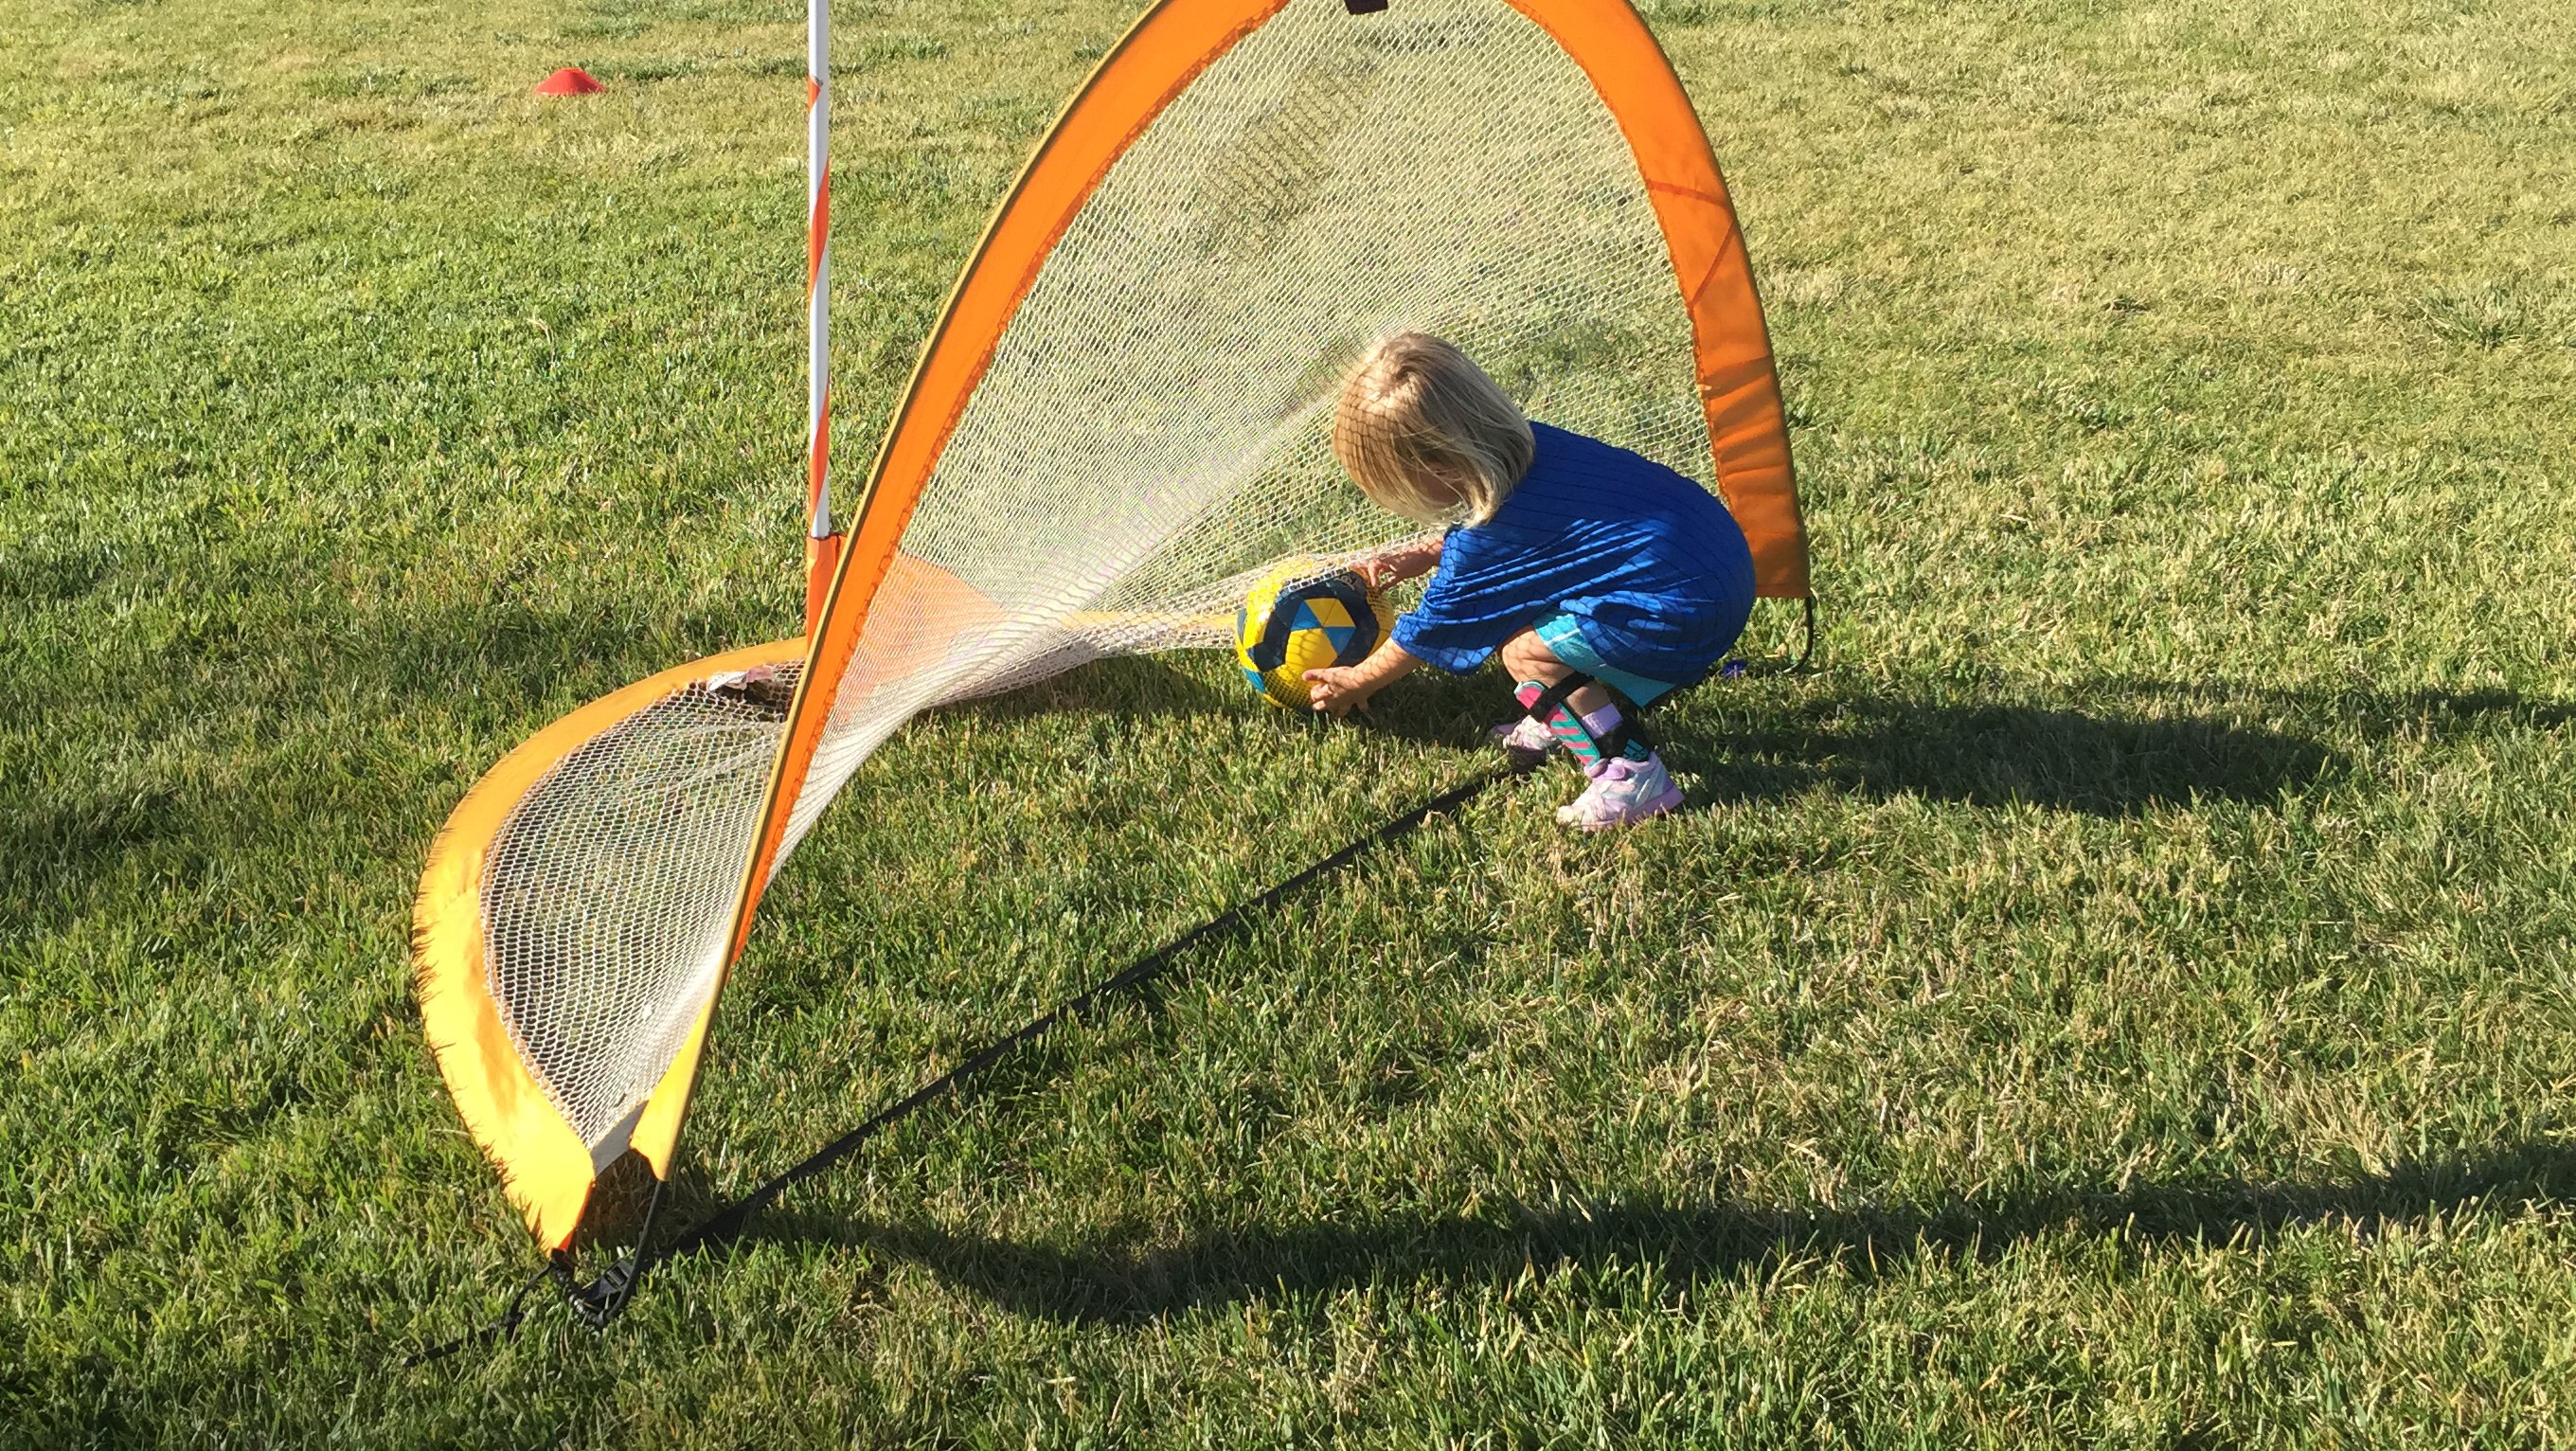 Goal at Kidz Love Soccer in Paso Robles California in a blog post on Two In Tow & On The Go.